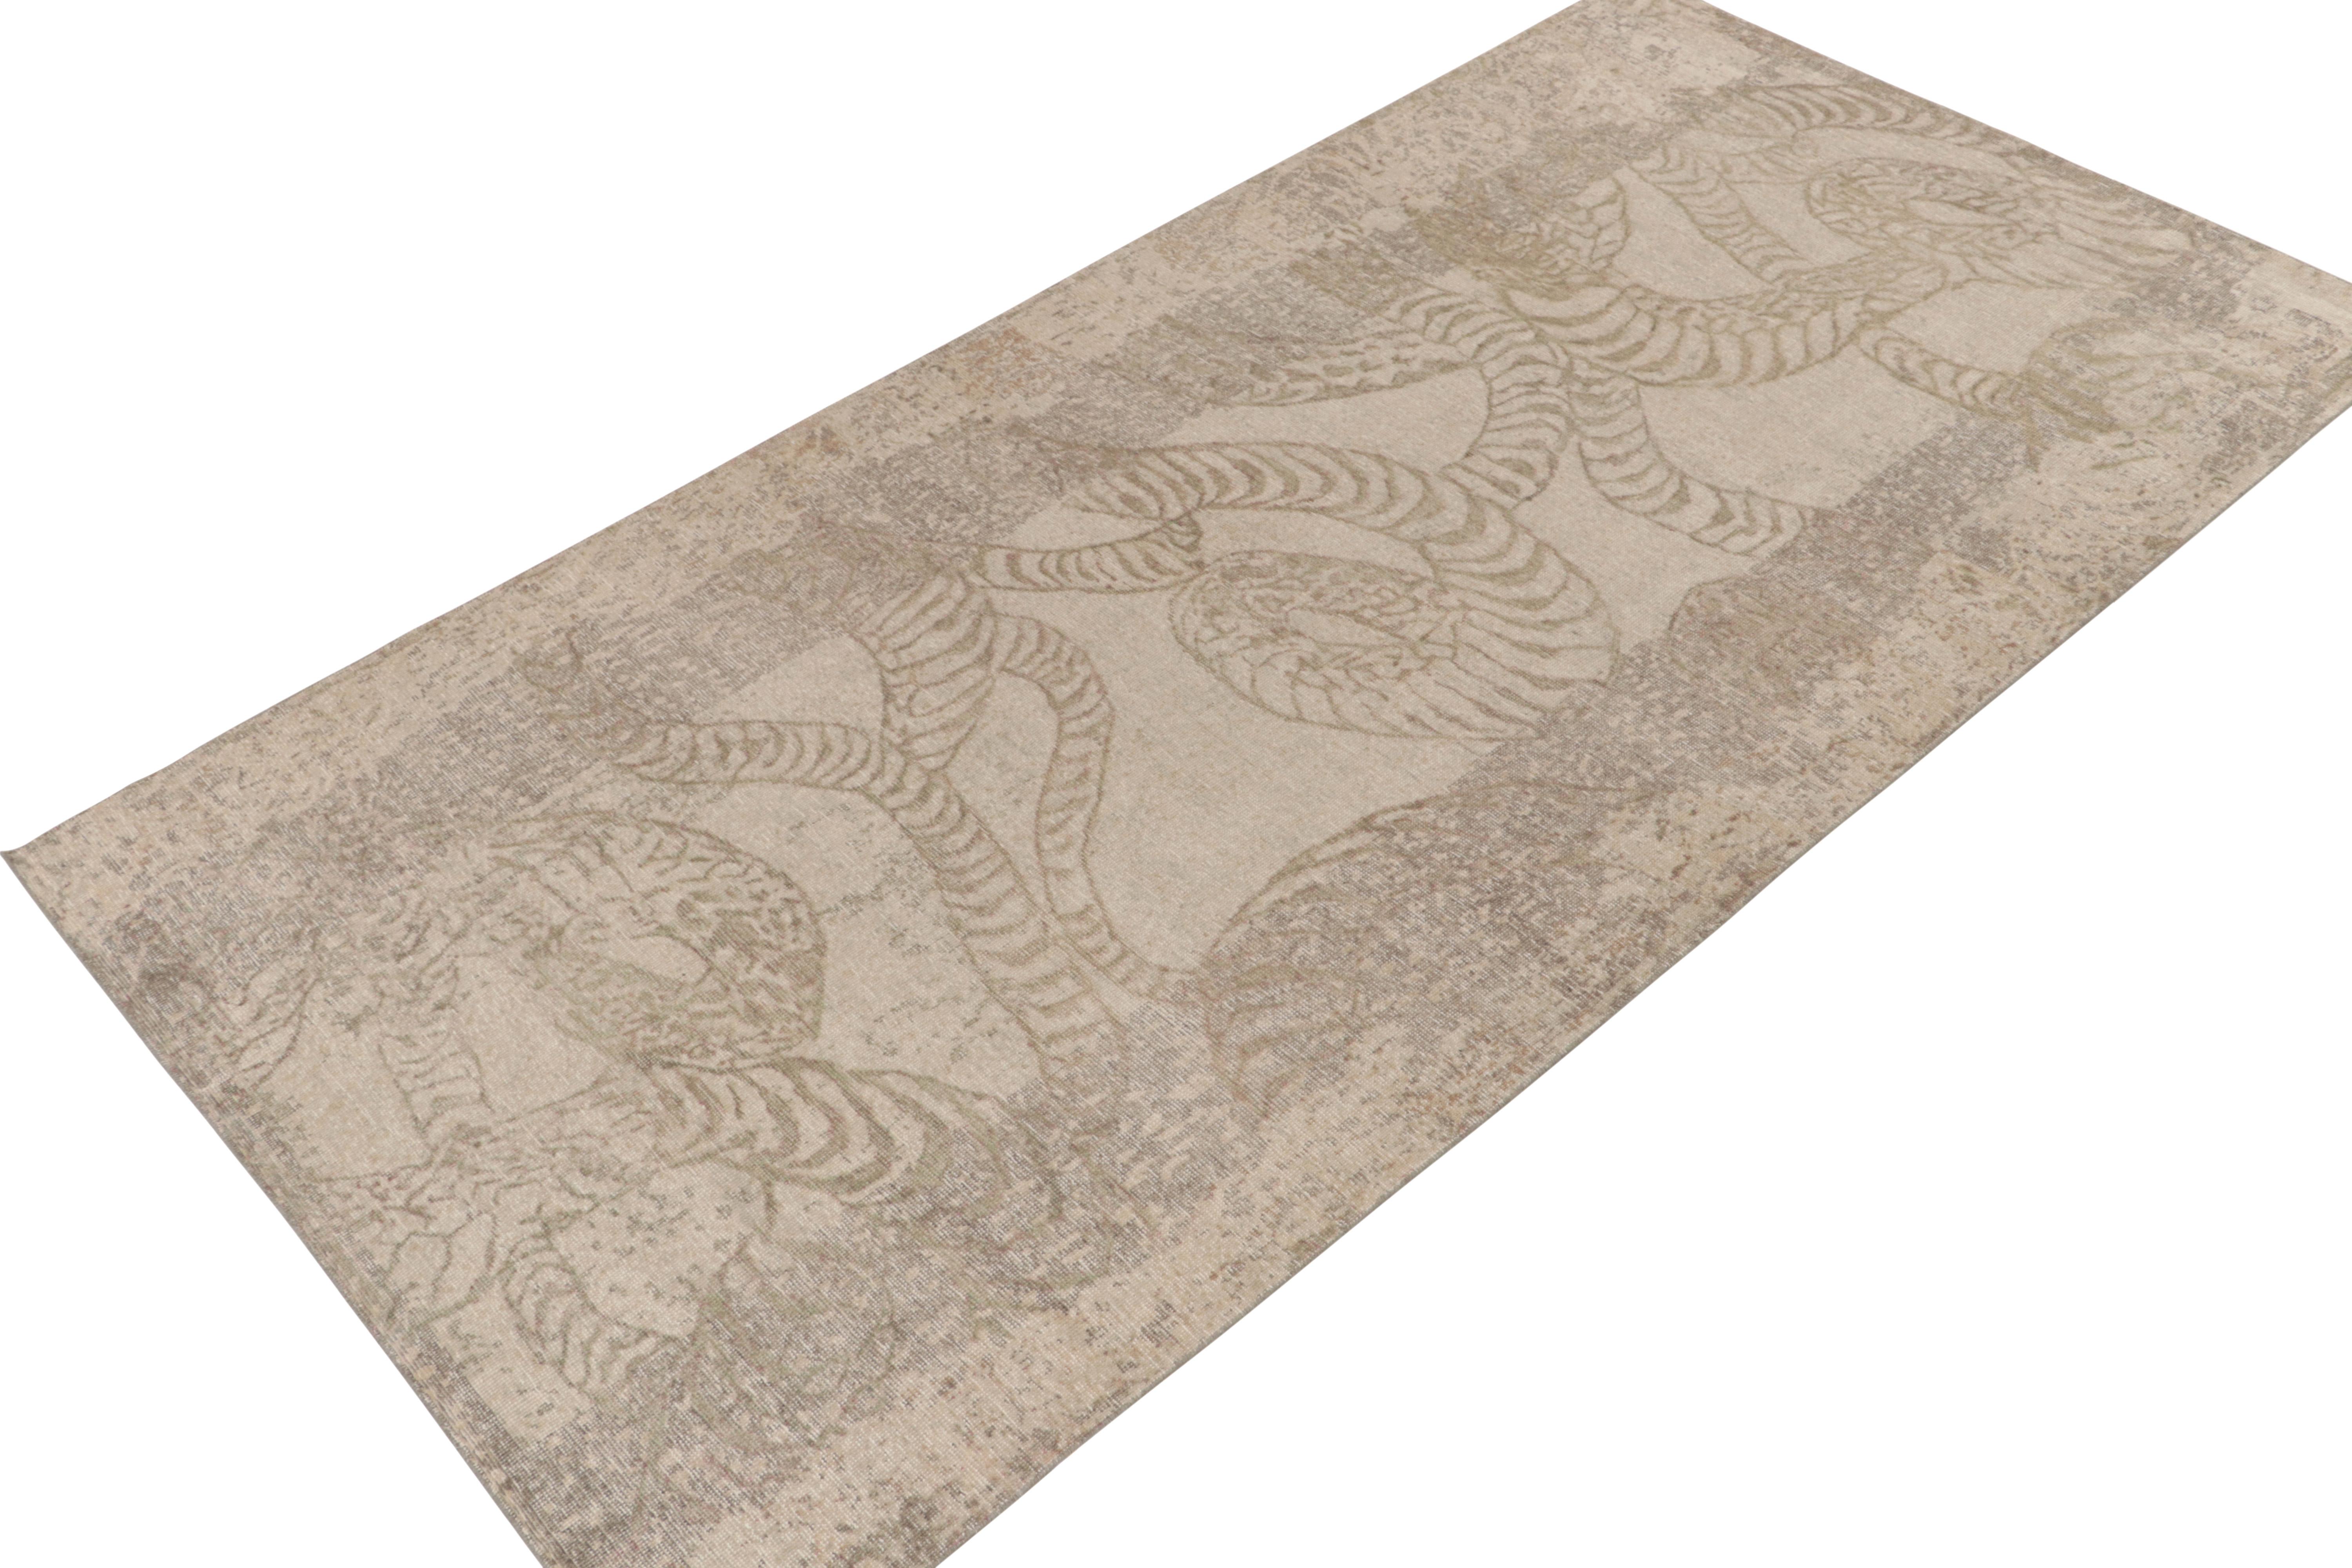 Modern Rug & Kilim's Distressed Style Abstract Rug in Beige-Brown & Gray Pattern For Sale